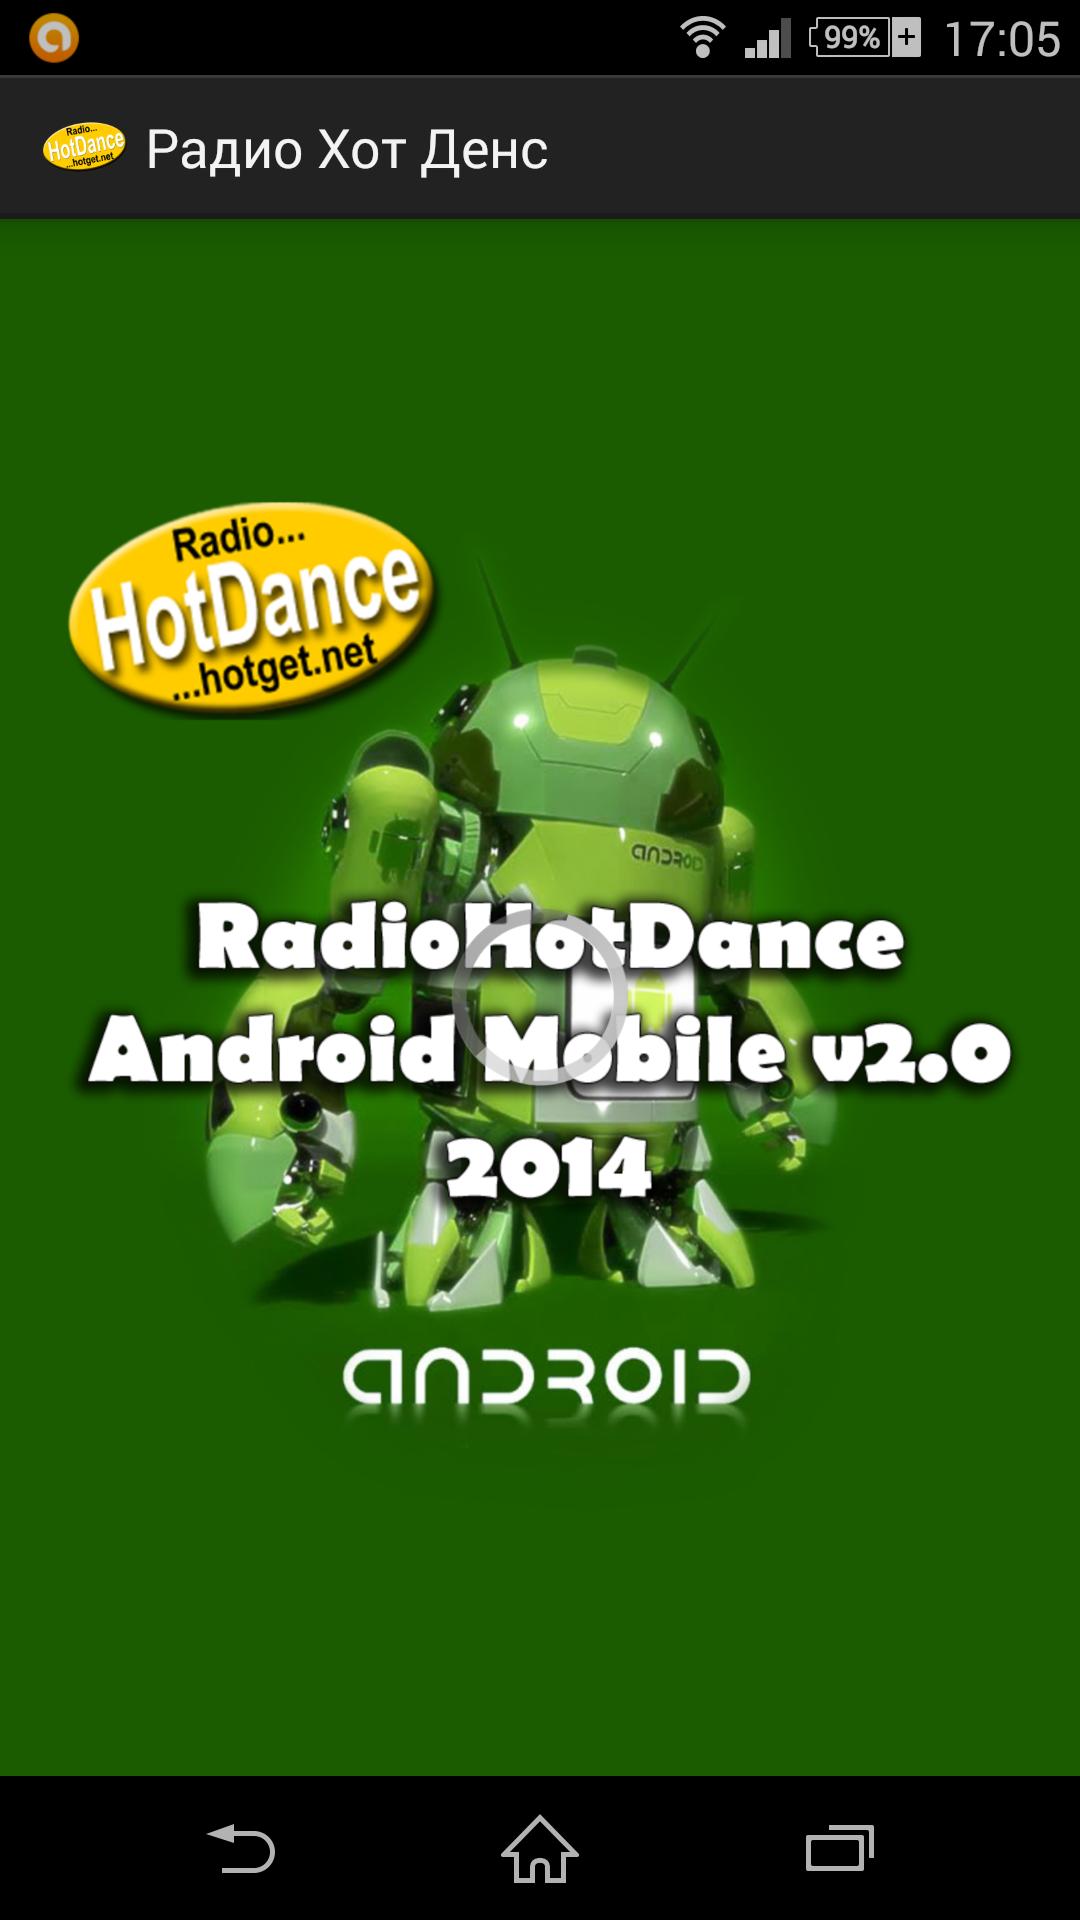 Radio Hot Dance for Android - APK Download